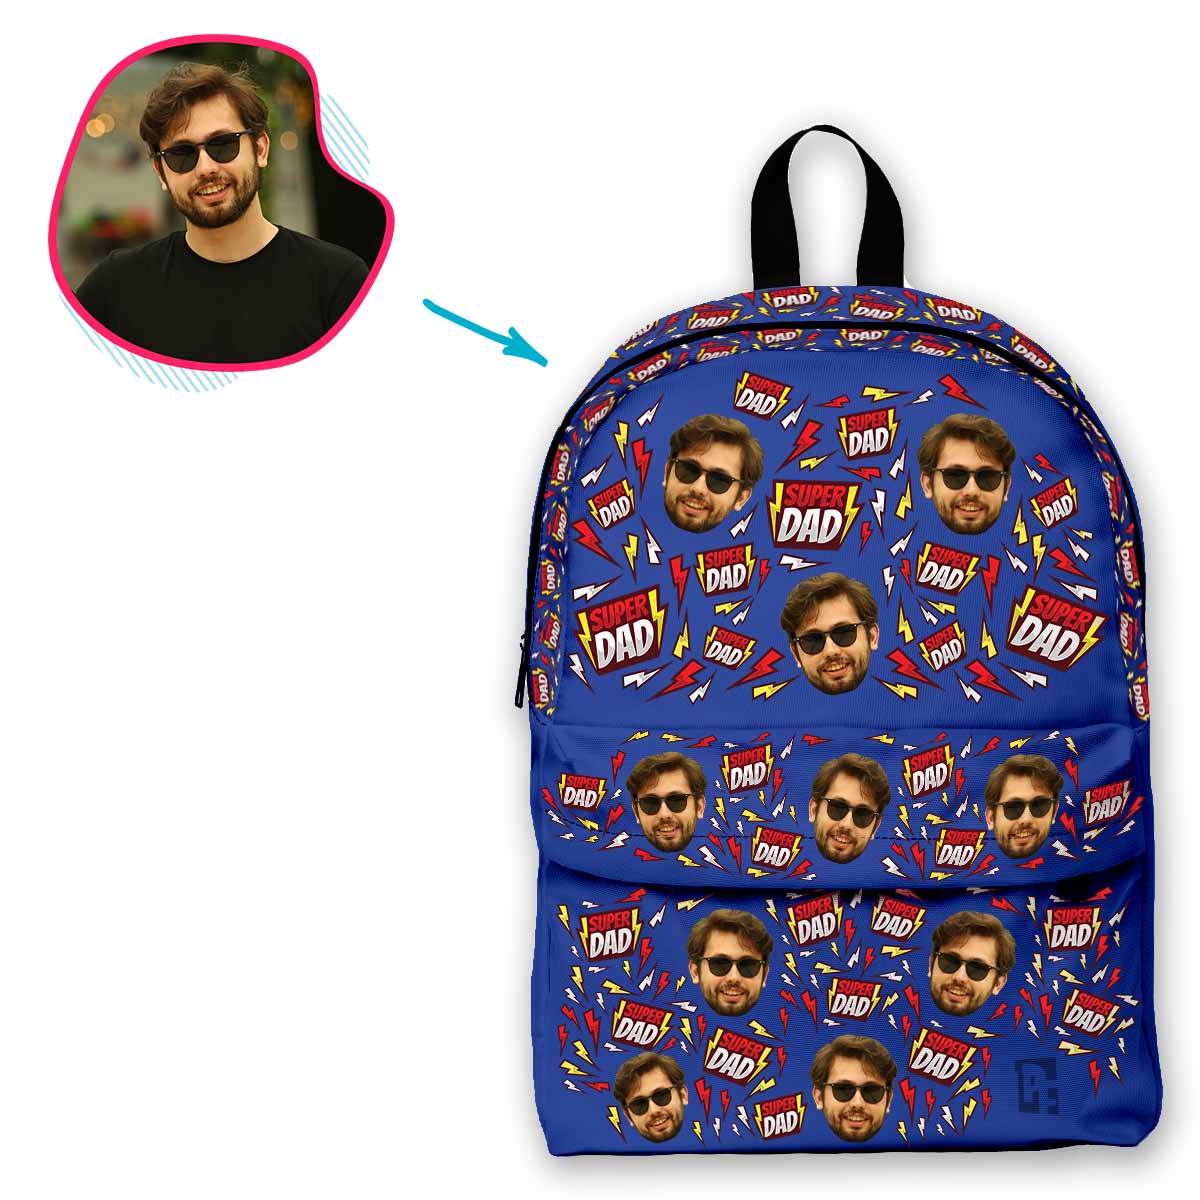 darkblue Super Dad classic backpack personalized with photo of face printed on it